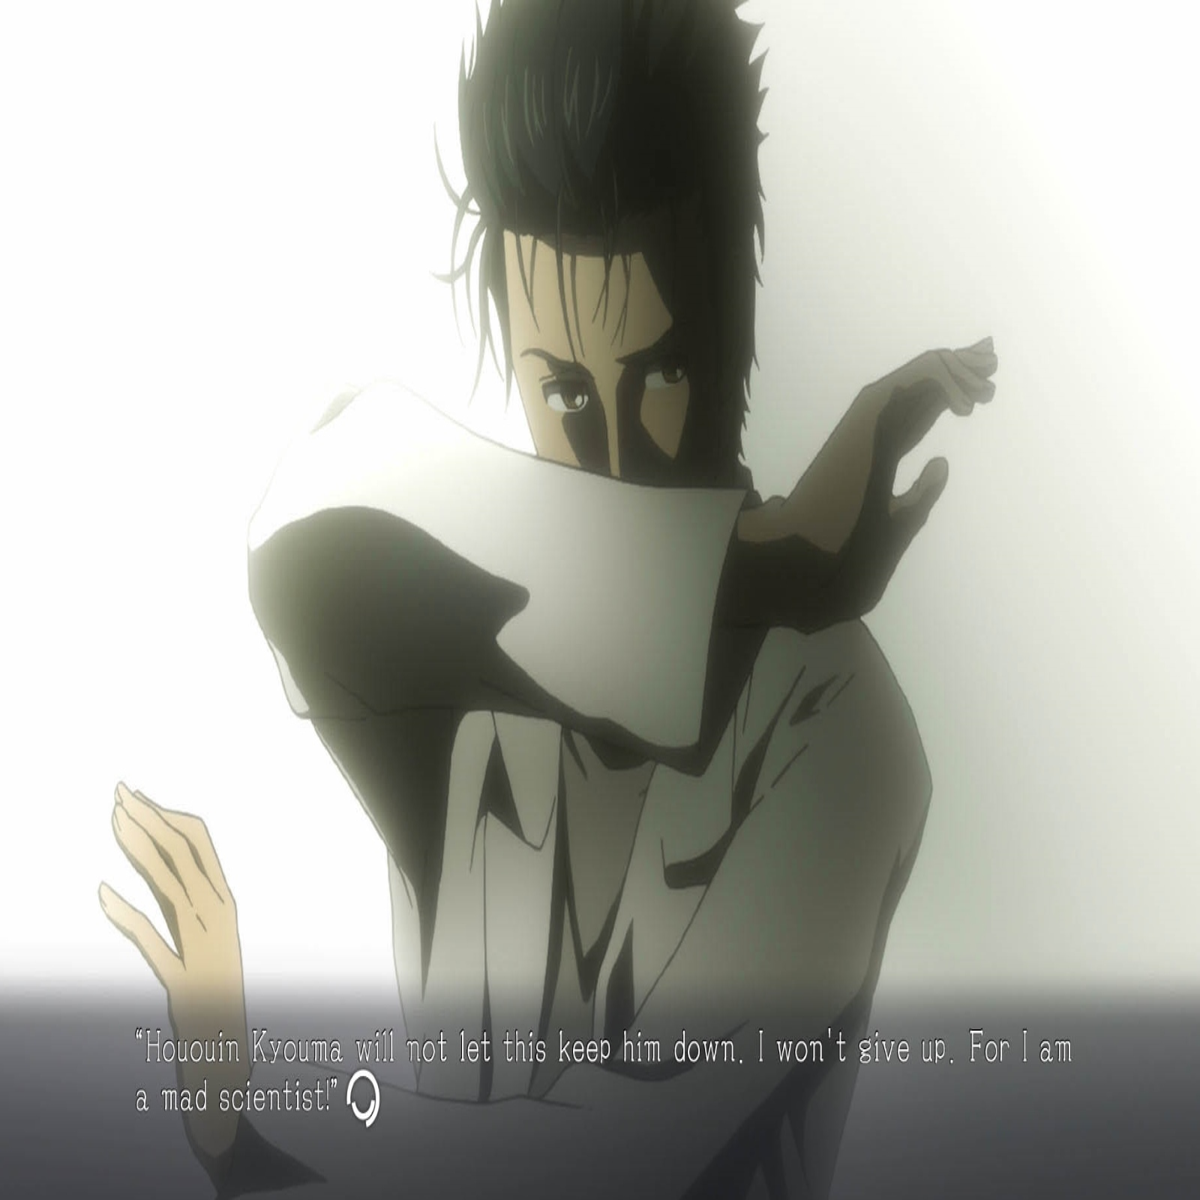 Steins;Gate: Things The Anime Does Better Than The Visual Novel